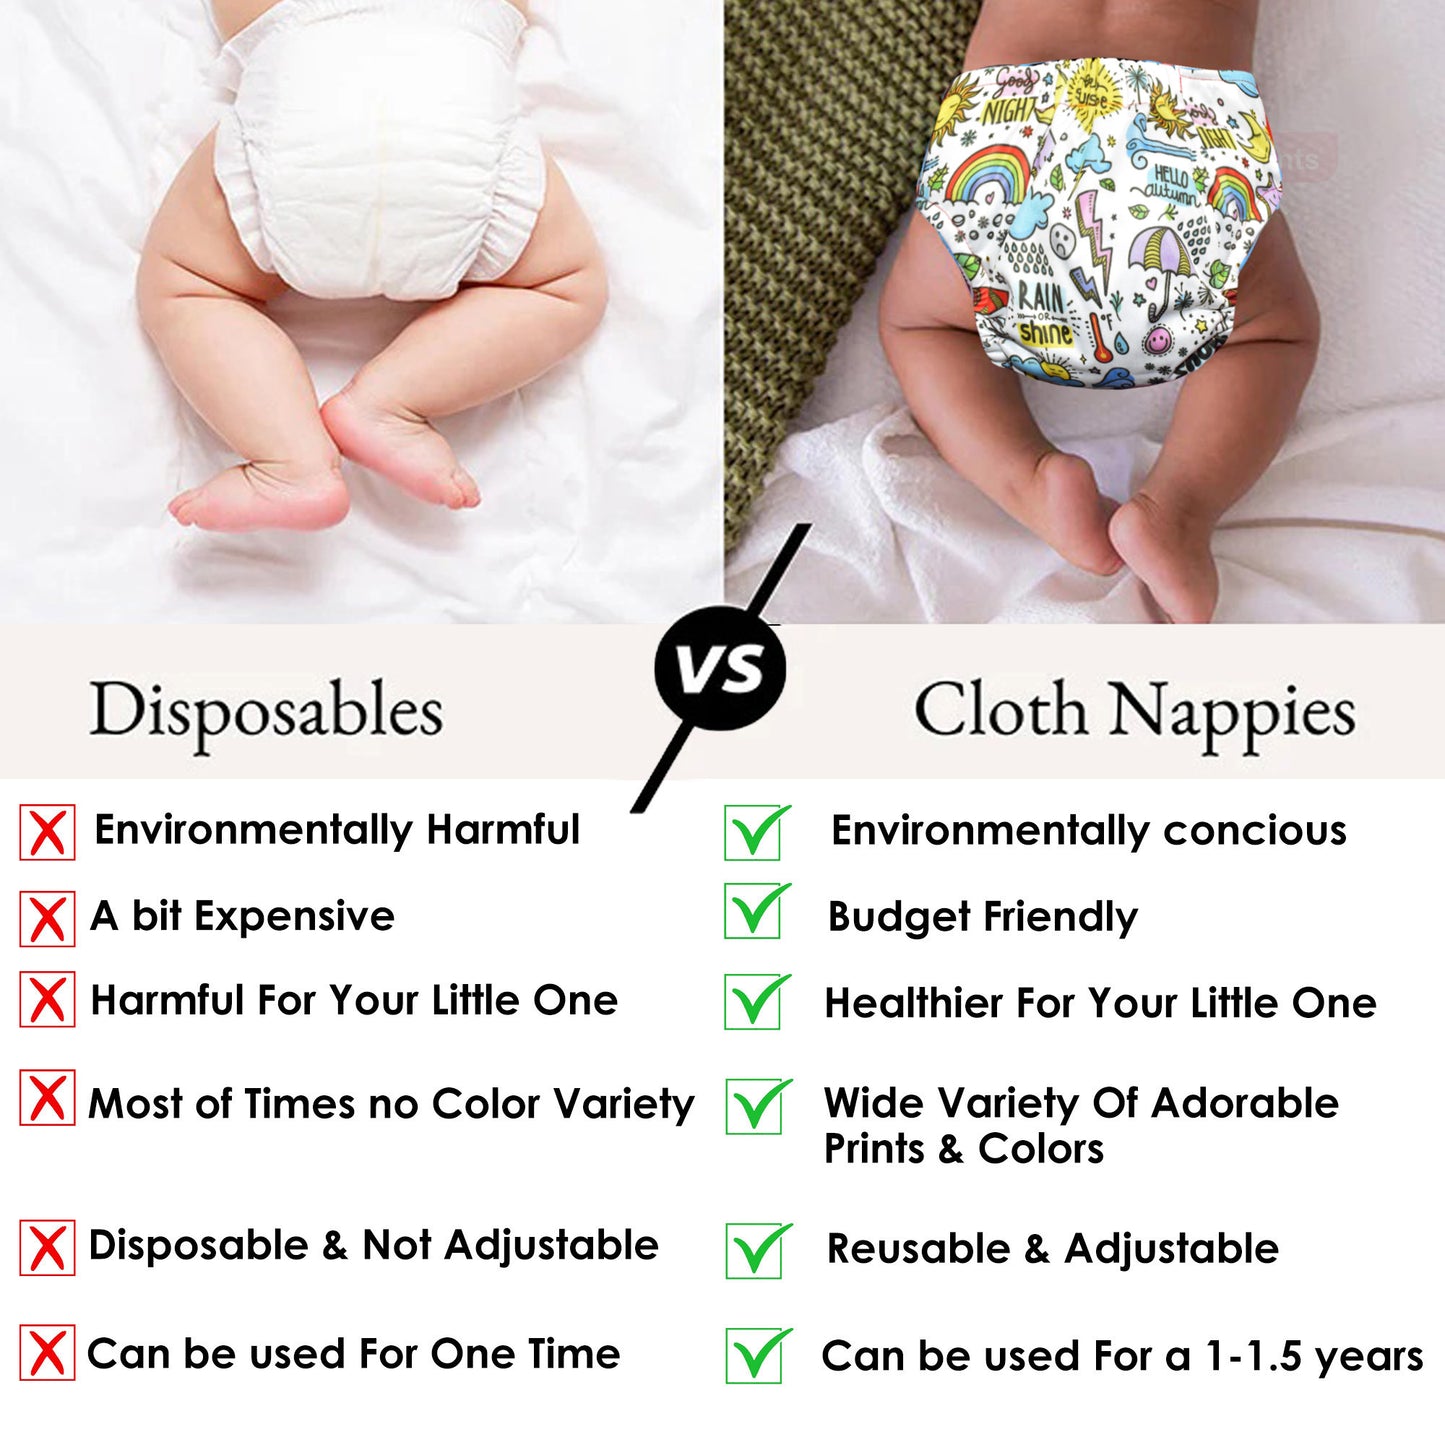 Rain Print Reusable and Adjustable Cloth Diapers With Insert (Pack of 2)